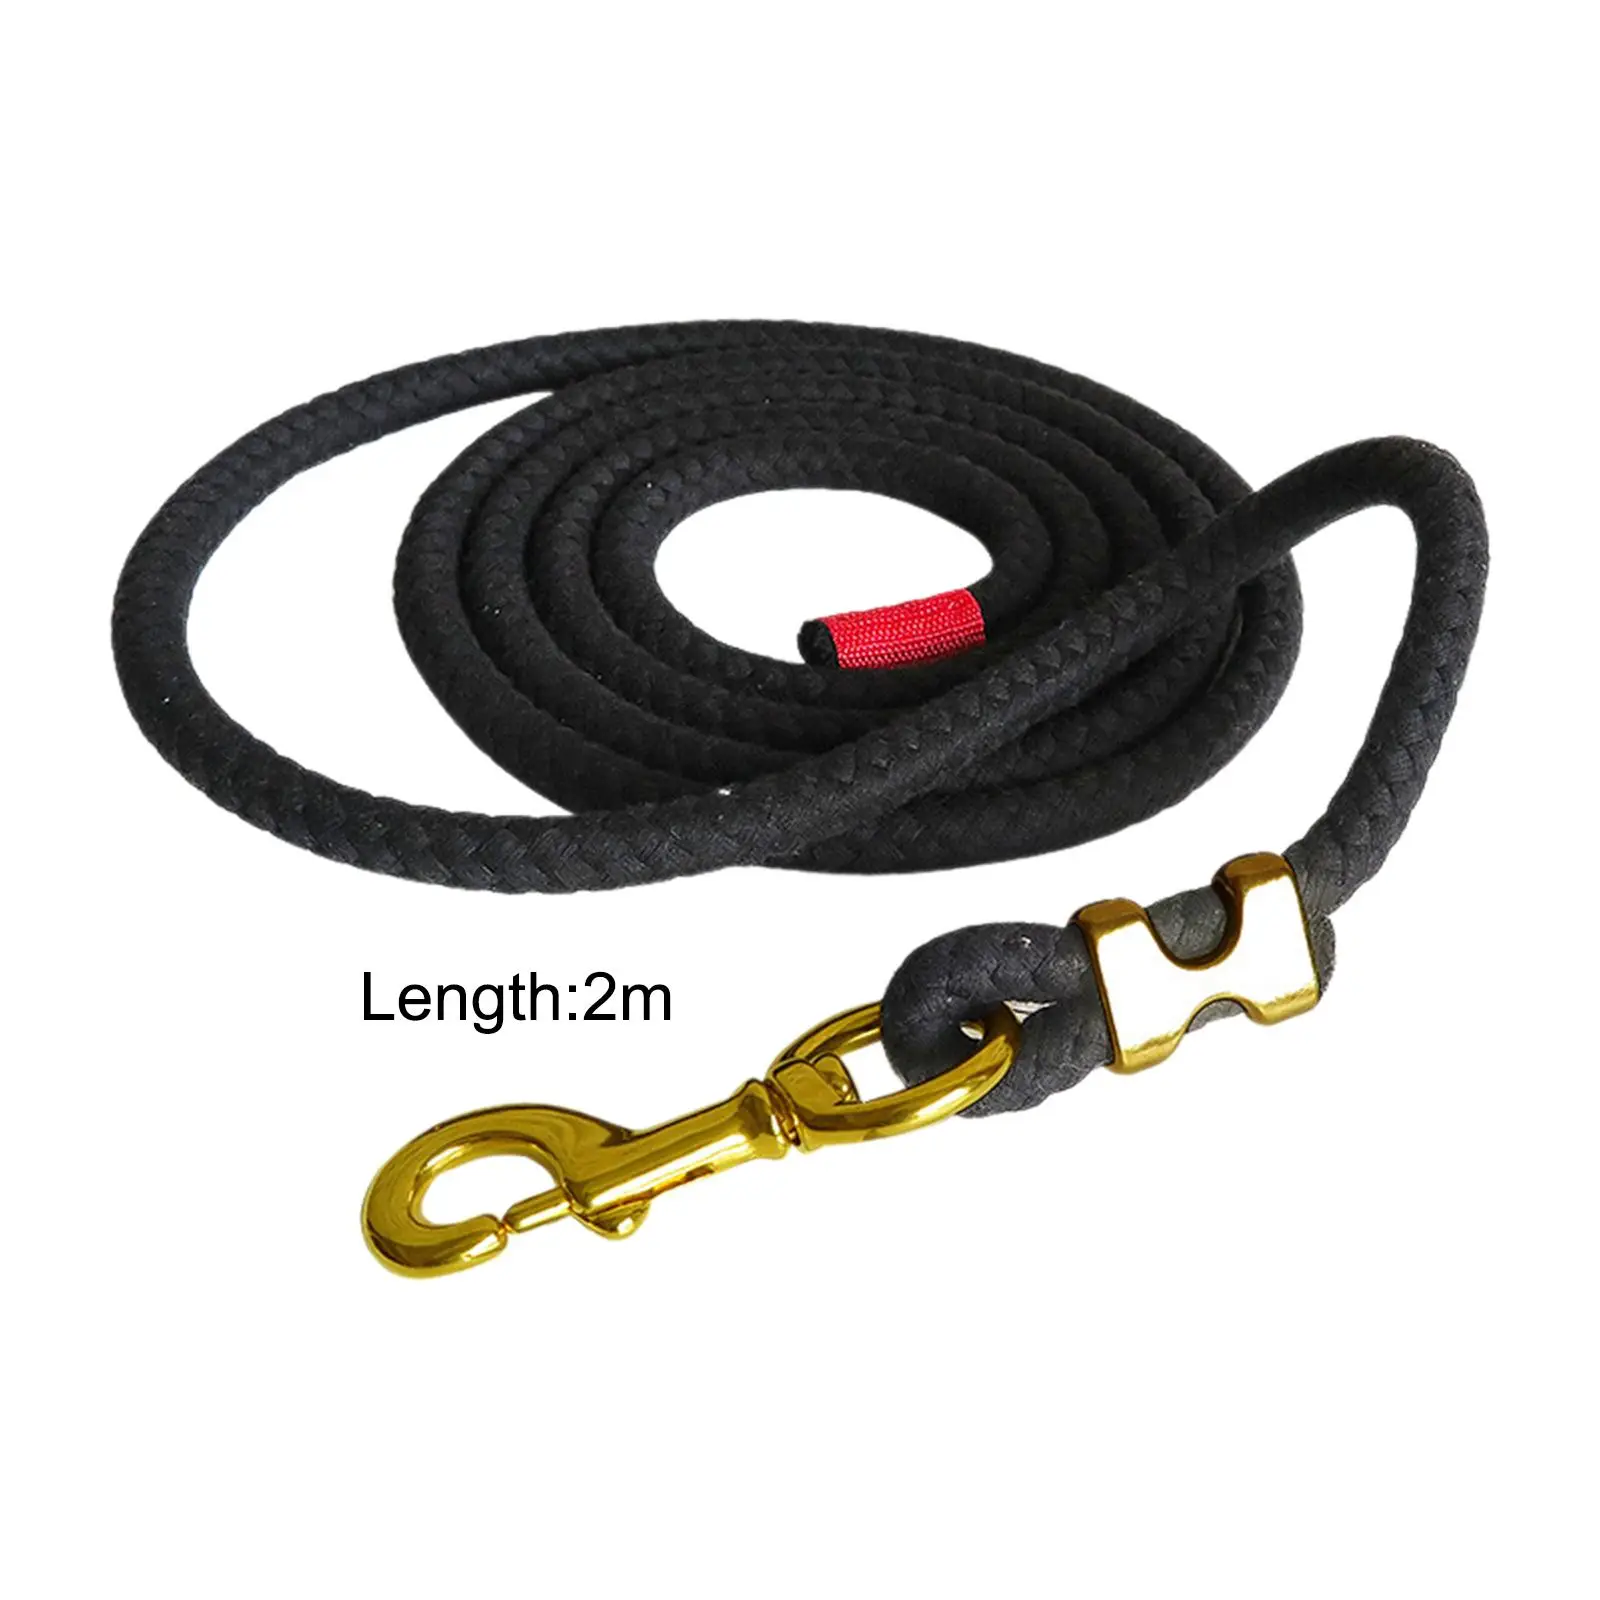 Horse Lead Rope Attaches to Halter or Harness Strong Durable for Leading Training Horse, Pet, or Sheep Lunge Line with Snap Hook